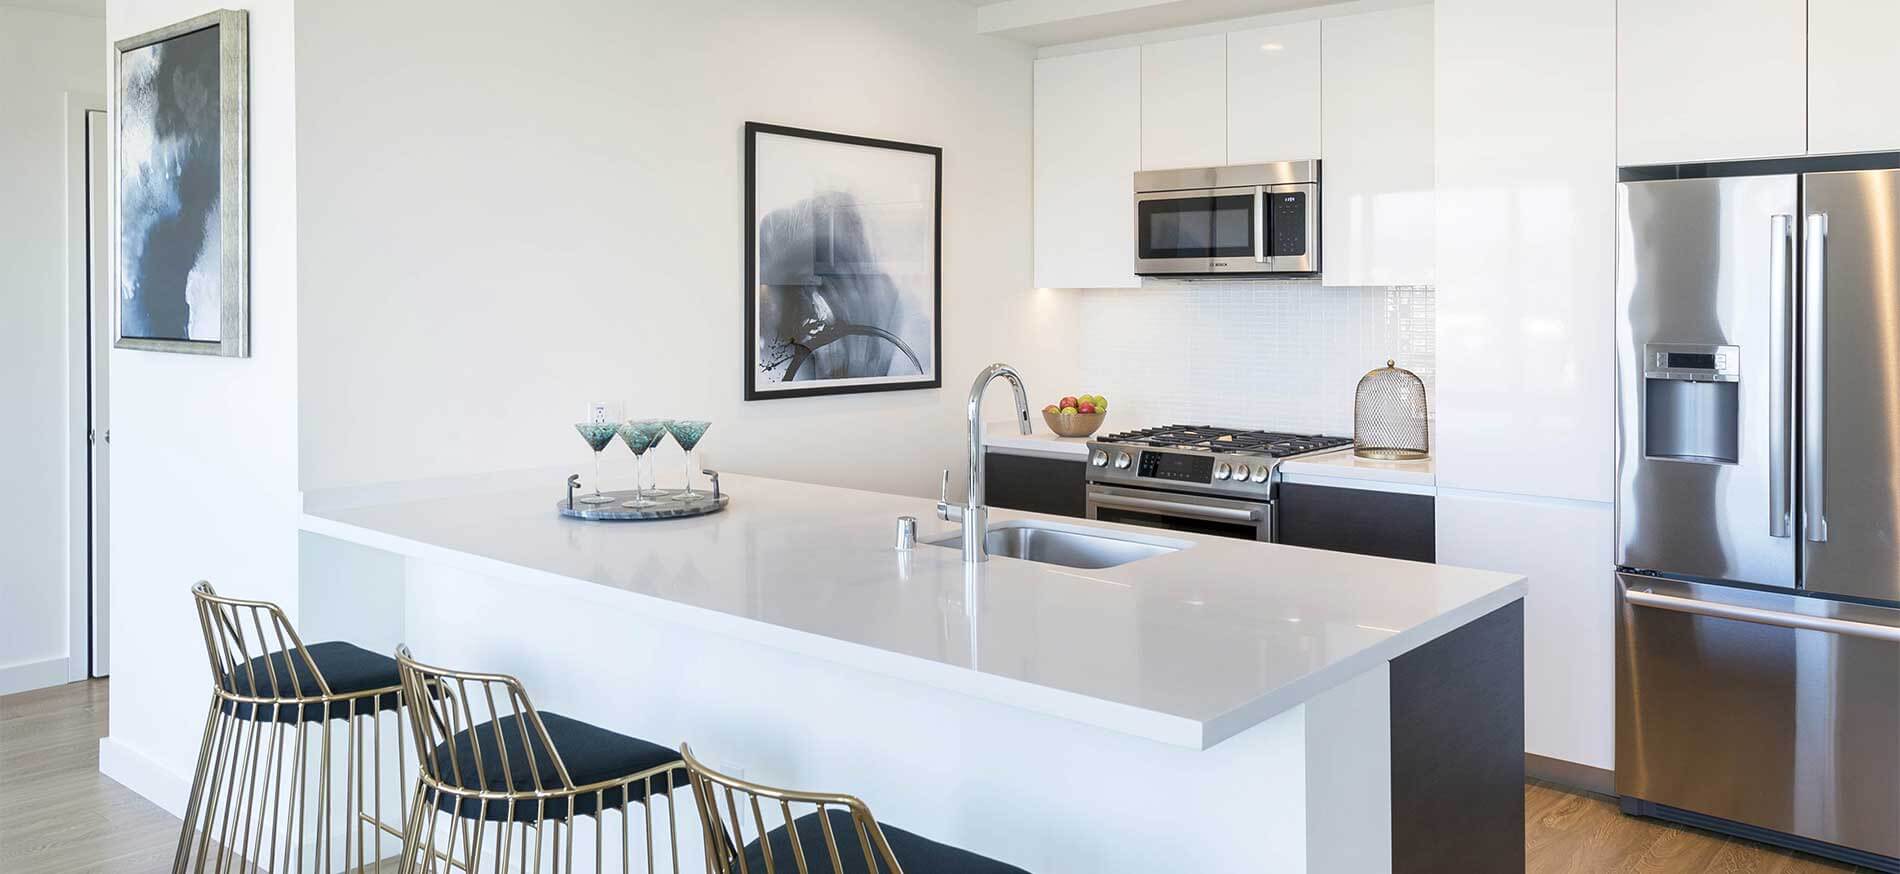 Vision on Wilshire apartment kitchen